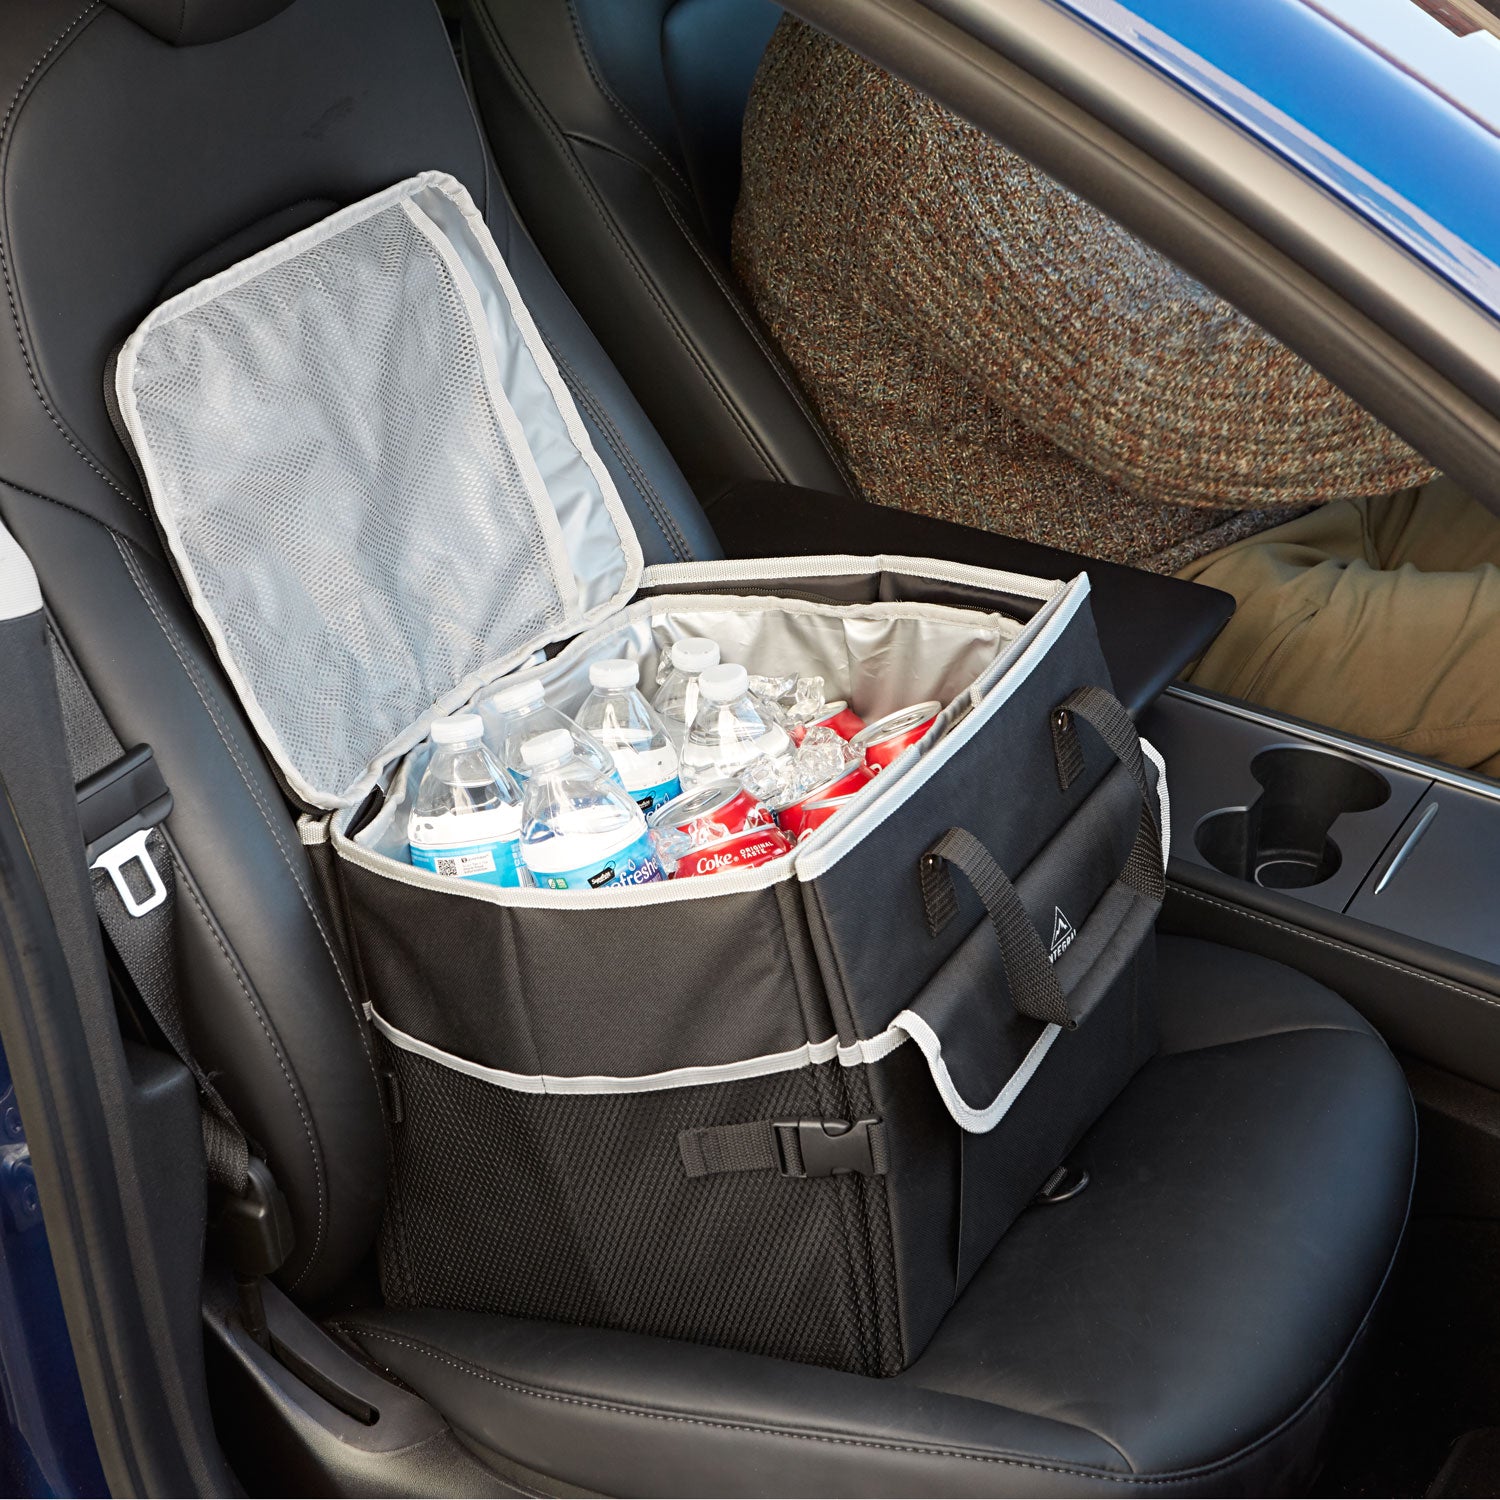 Integral Trunk Organizer with Cooler and Reusable Bags